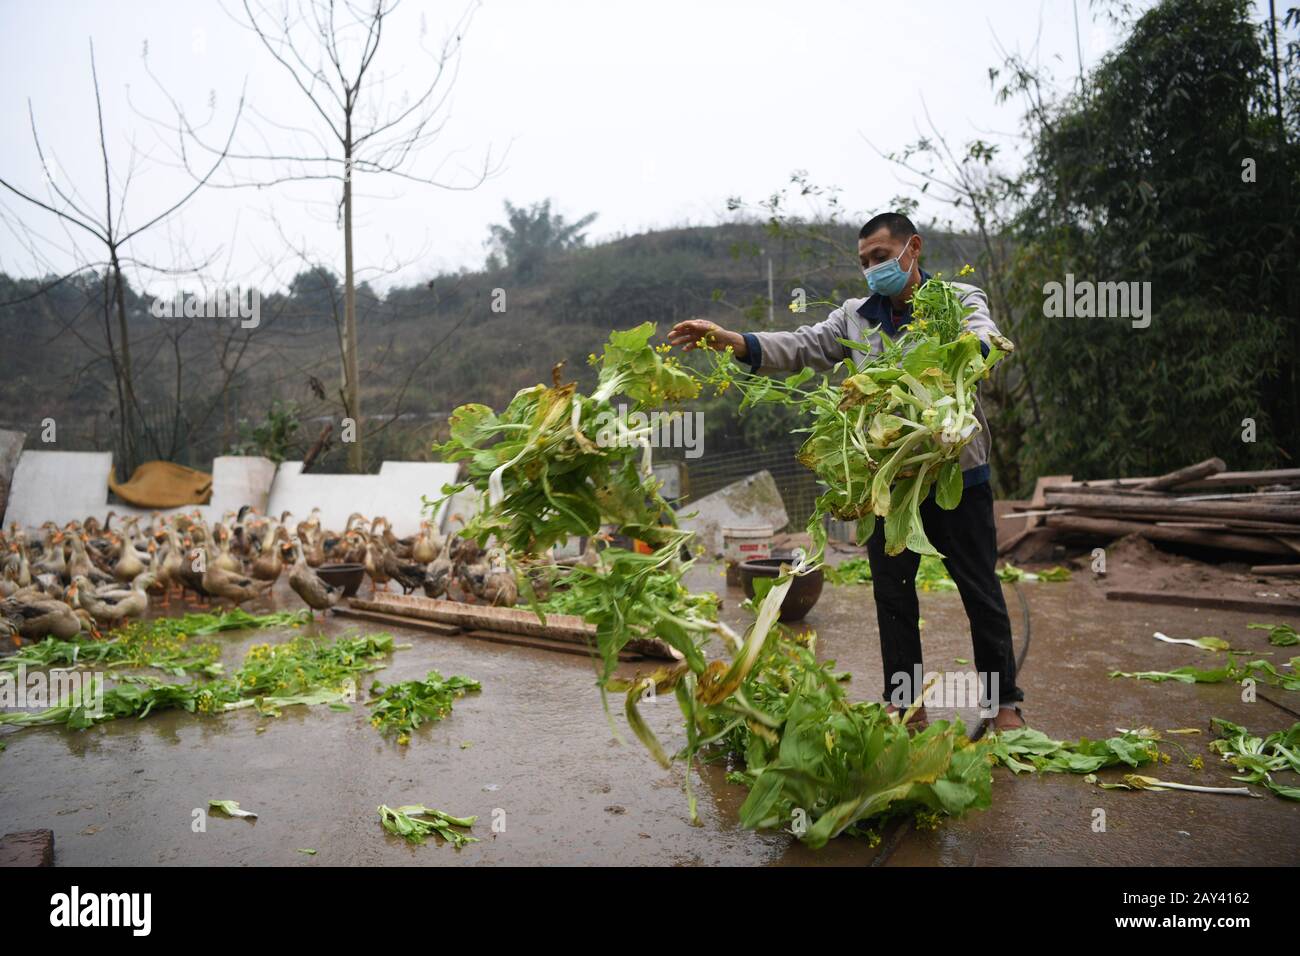 Chongqing. 14th Feb, 2020. Farmer Fu Zongyong feeds ducks at Shuangjing village of Yufengshan Town in Yubei District of southwest China's Chongqing Municipality, Feb. 14, 2020. Since the outbreak of the novel coronavirus, Fu Zongyong, a poverty-striken farmer has been unable to sell his ducks due to the closing of live poultry markets. Local authorities sent staff to help him with quarantine and sales of ducks to ensure his income during the battle against the epidemic. Credit: Tang Yi/Xinhua/Alamy Live News Stock Photo